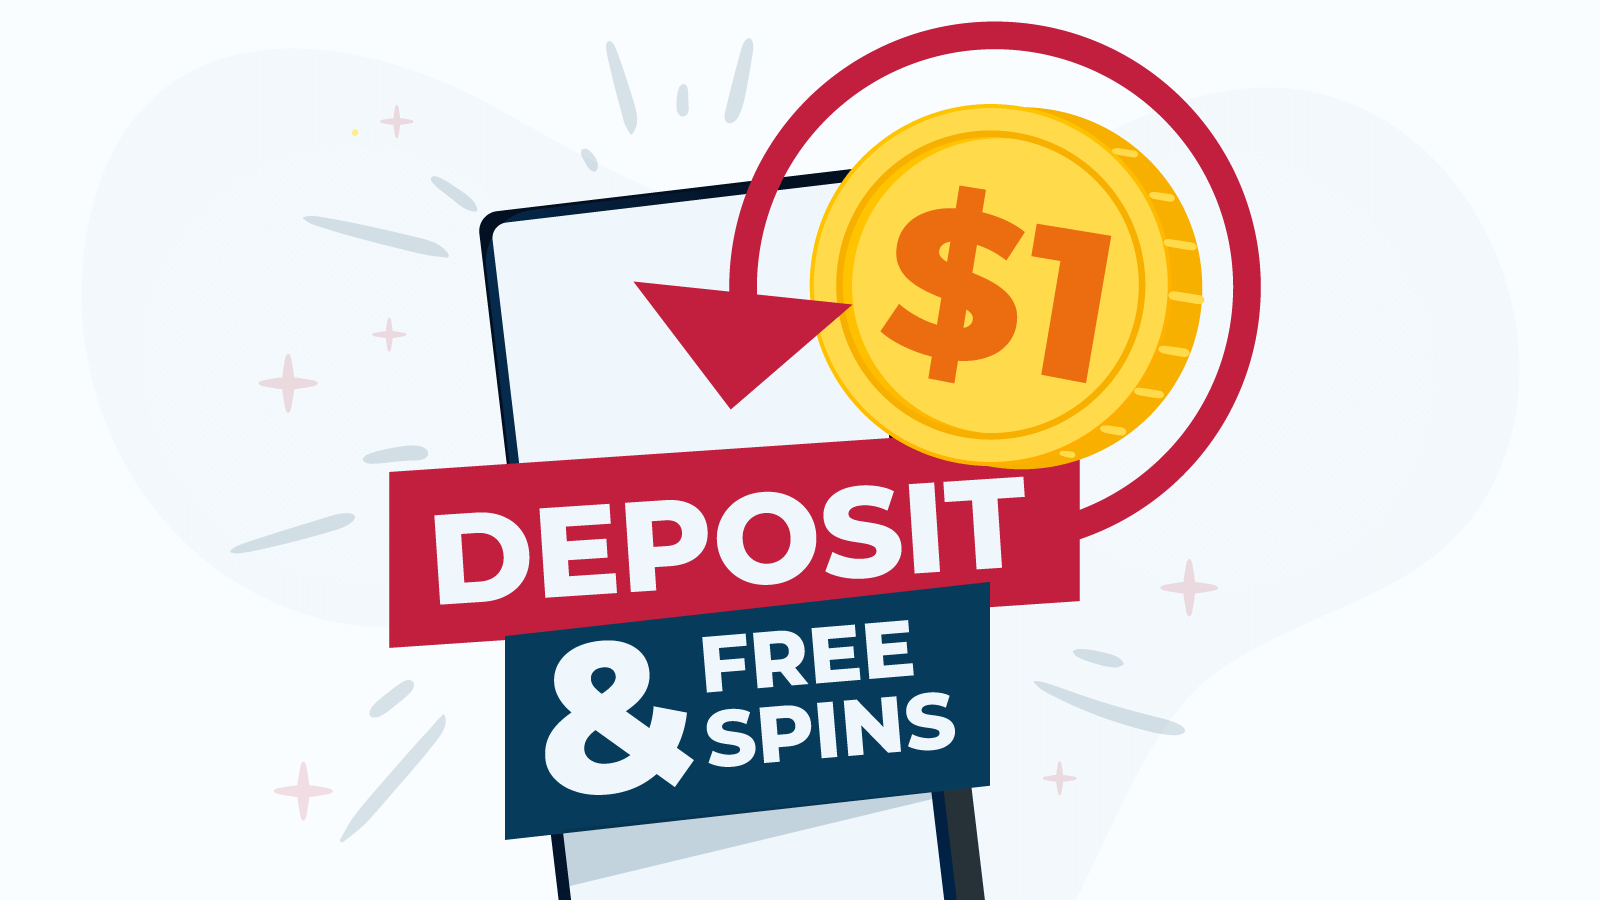 Get Free Spins For $1 And Other Products